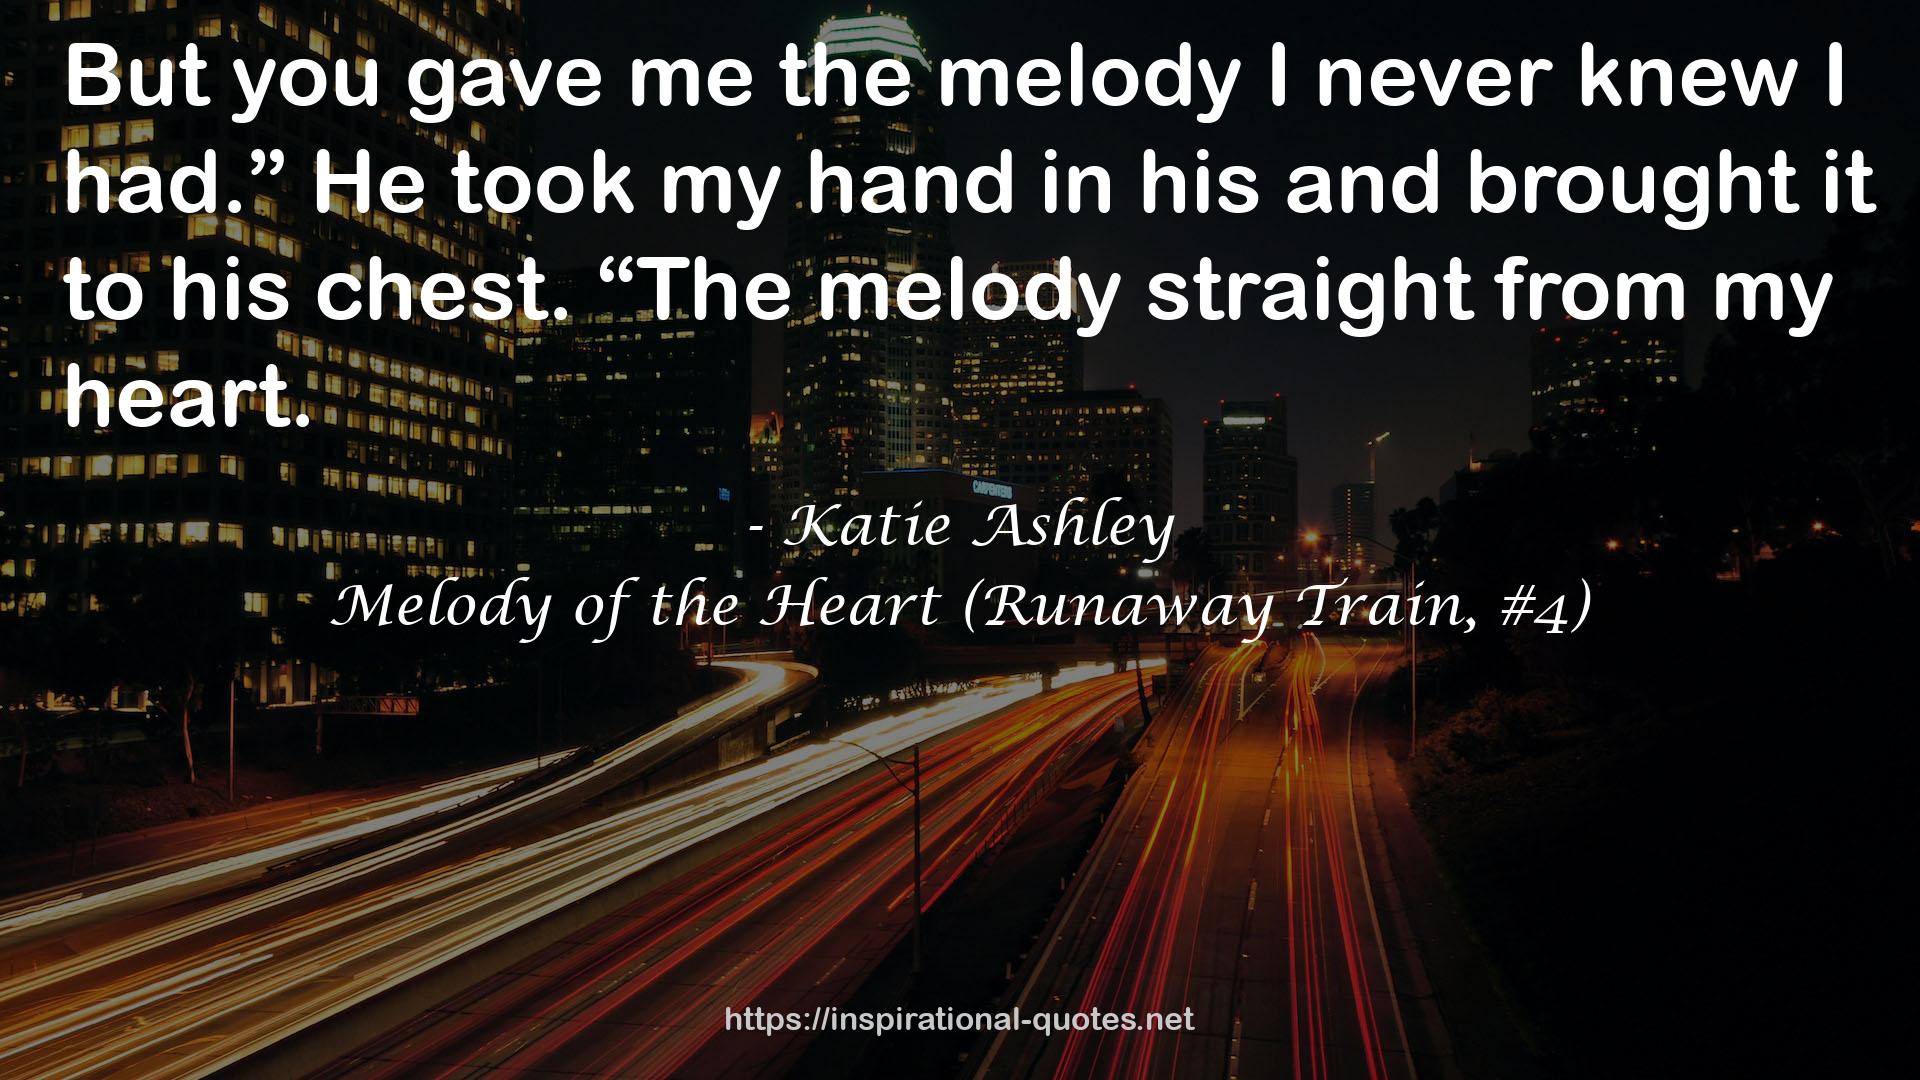 Melody of the Heart (Runaway Train, #4) QUOTES